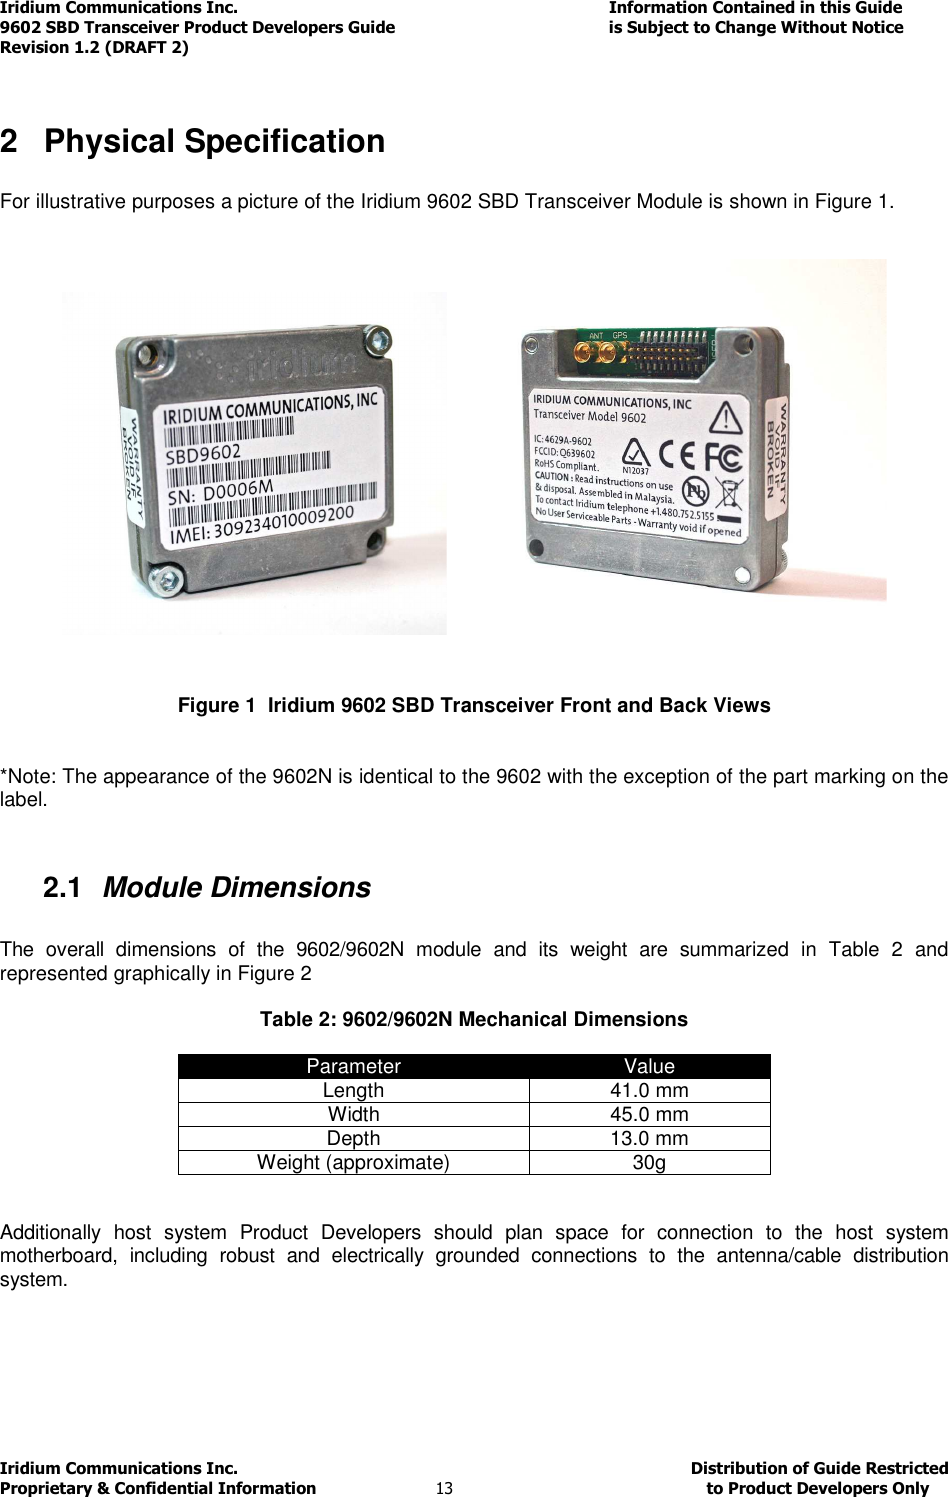 Iridium Communications Inc.                                      Information Contained in this Guide  9602 SBD Transceiver Product Developers Guide                                             is Subject to Change Without Notice  Revision 1.2 (DRAFT 2) Iridium Communications Inc.                                           Distribution of Guide Restricted Proprietary &amp; Confidential Information                         13                                                  to Product Developers Only            2  Physical Specification  For illustrative purposes a picture of the Iridium 9602 SBD Transceiver Module is shown in Figure 1.        Figure 1  Iridium 9602 SBD Transceiver Front and Back Views   *Note: The appearance of the 9602N is identical to the 9602 with the exception of the part marking on the label.  2.1  Module Dimensions  The  overall  dimensions  of  the  9602/9602N  module  and  its  weight  are  summarized  in  Table  2  and represented graphically in Figure 2  Table 2: 9602/9602N Mechanical Dimensions  Parameter  Value Length  41.0 mm Width  45.0 mm  Depth  13.0 mm Weight (approximate)  30g   Additionally  host  system  Product  Developers  should  plan  space  for  connection  to  the  host  system motherboard,  including  robust  and  electrically  grounded  connections  to  the  antenna/cable  distribution system.     